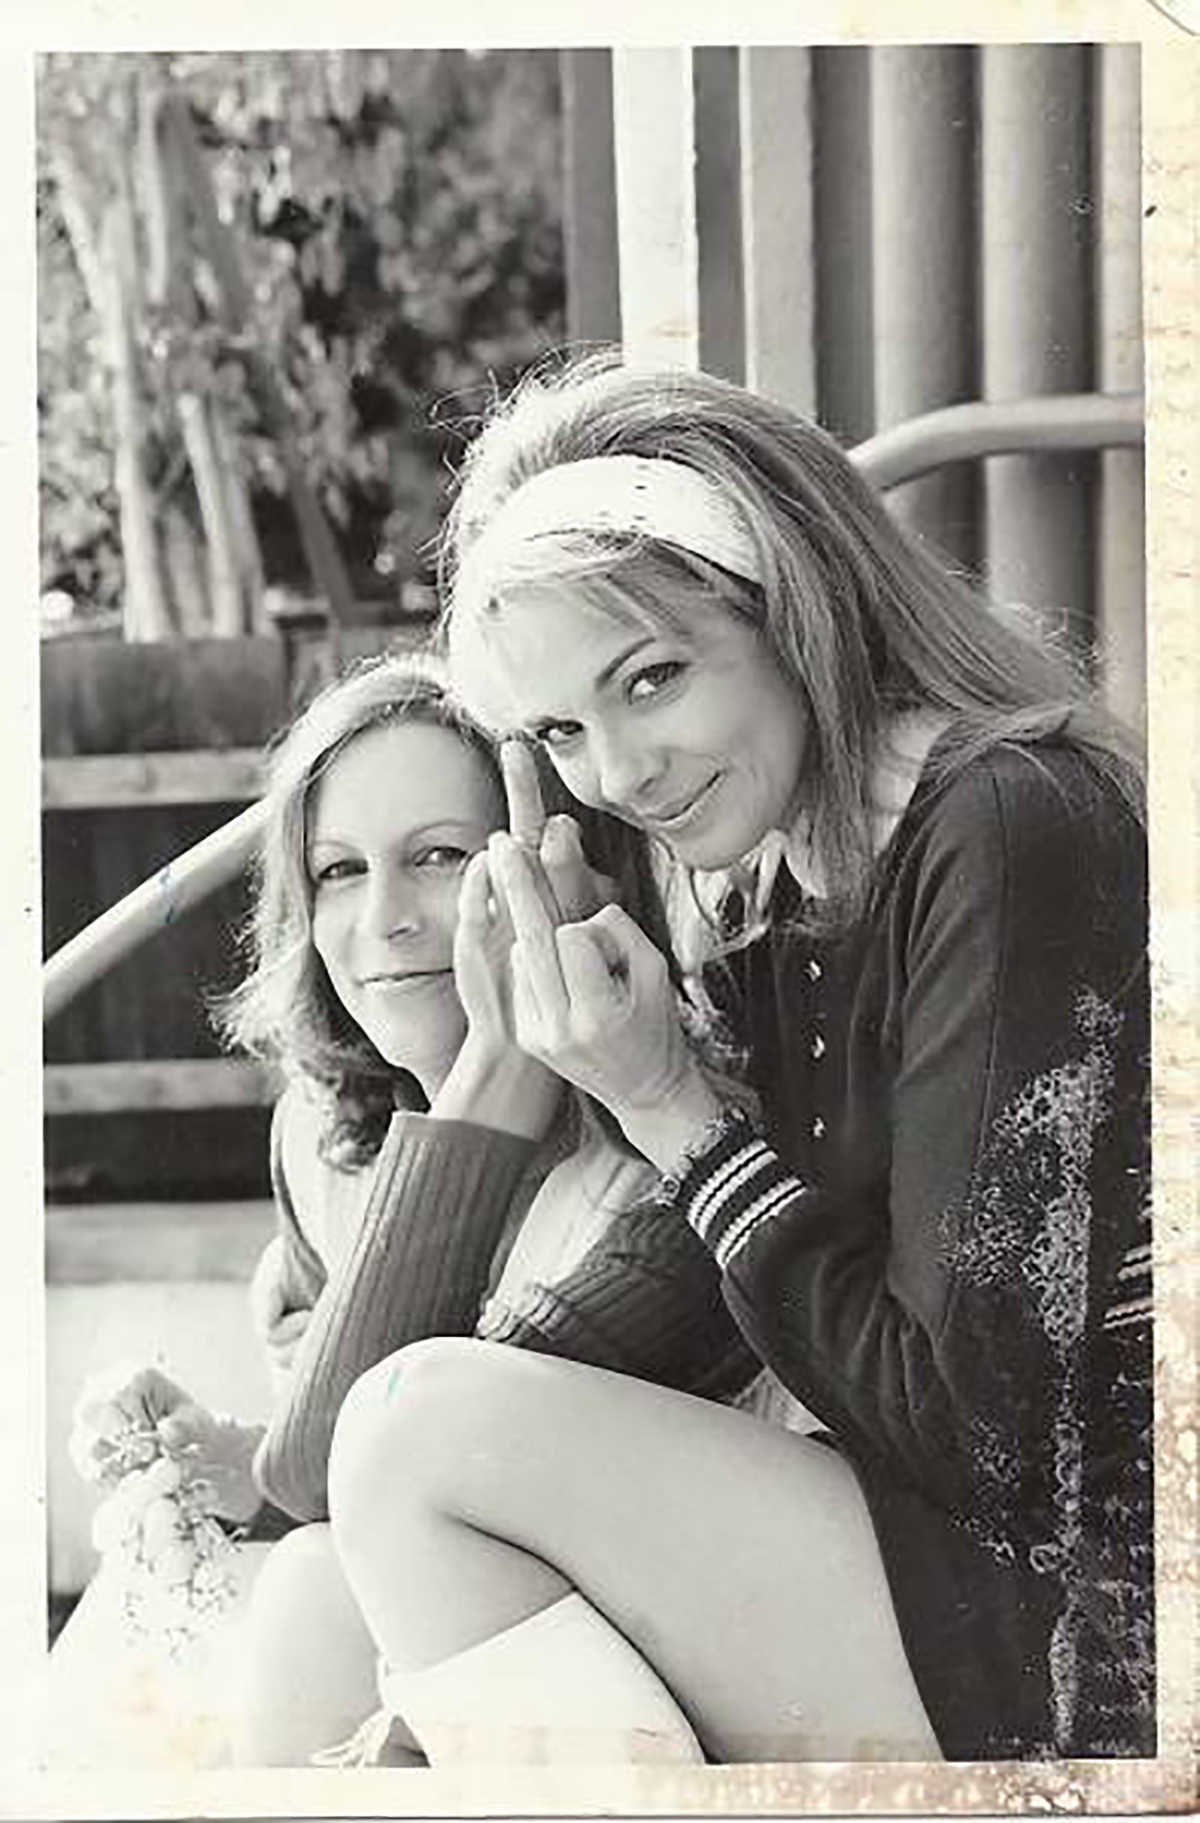 Jamie Lee Curtis and Kim Cattrall flipping the bird on the set of The Heidi Chronicles (1995).